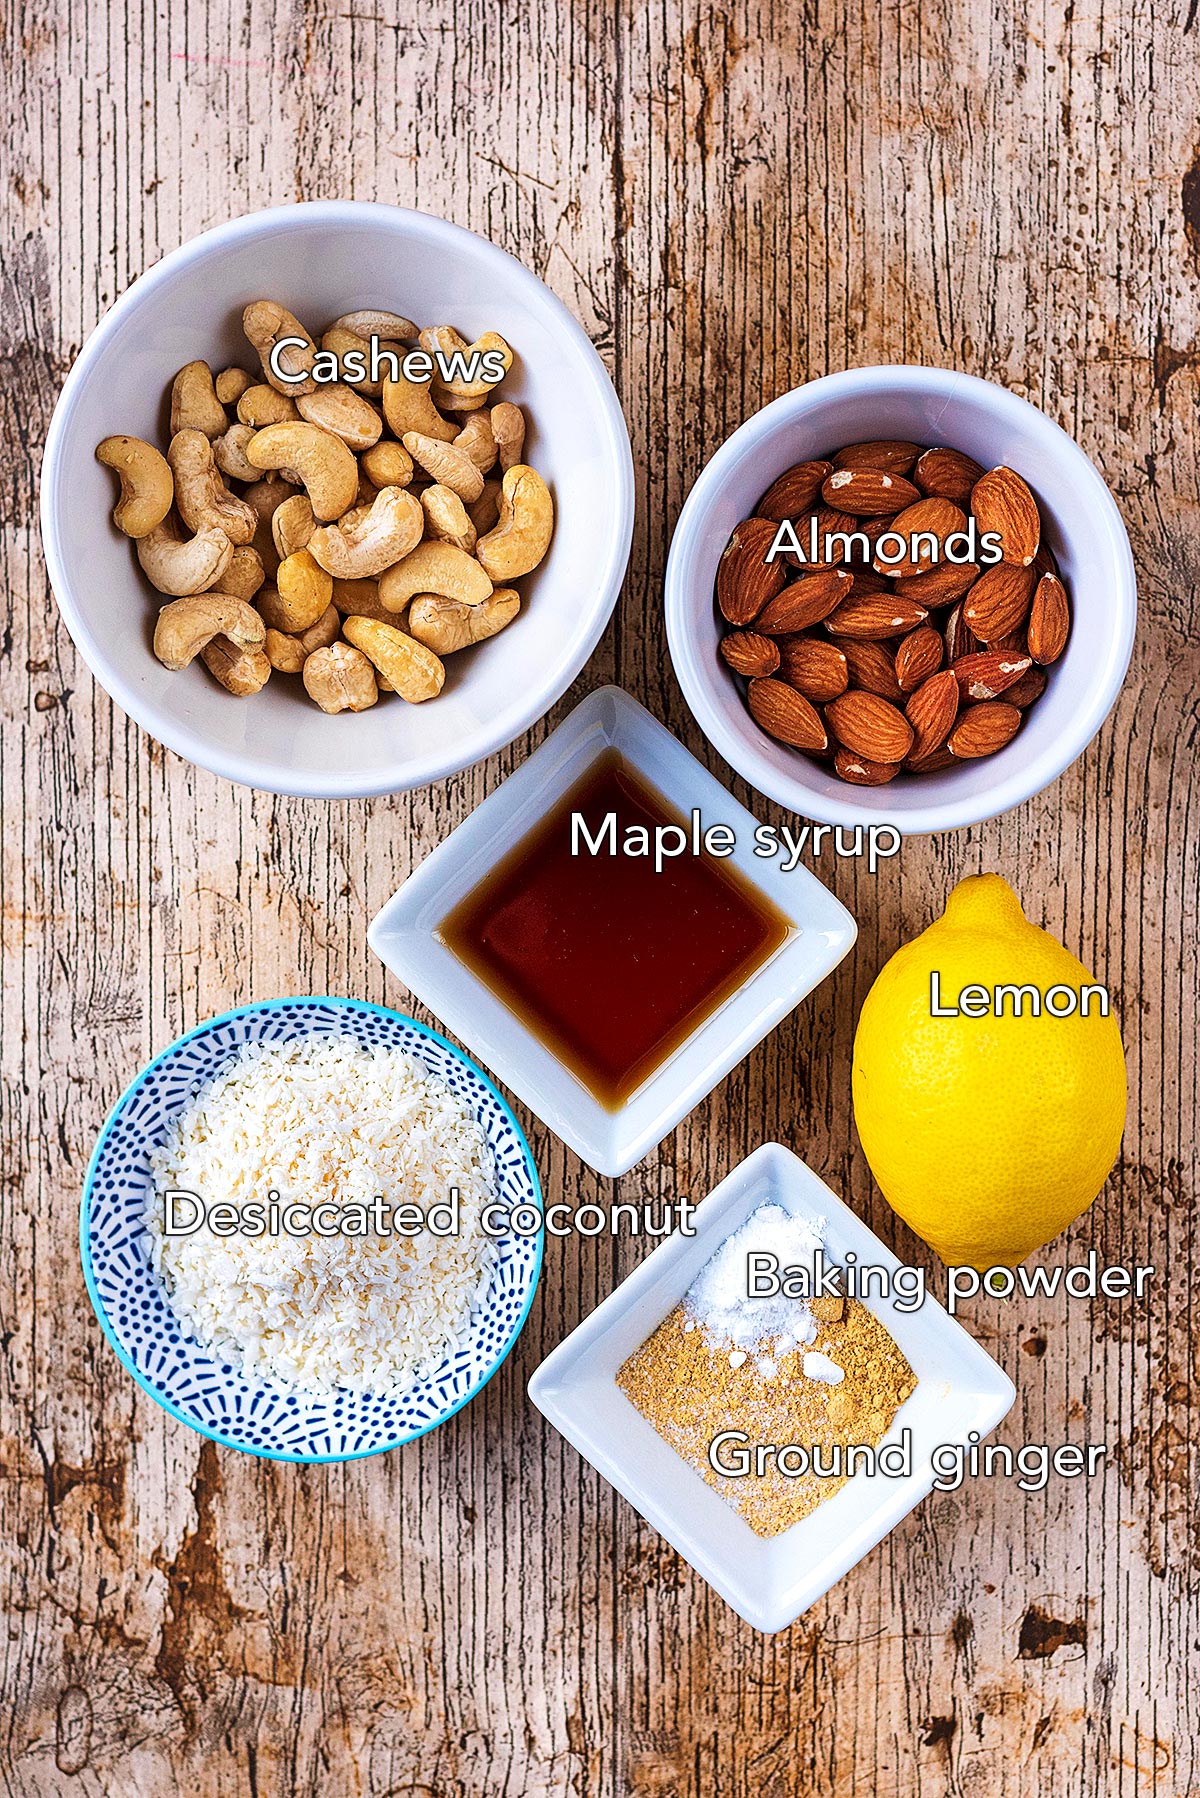 Small bowls of cashews and almonds, dishes of maple syrup, desiccated coconut and ground ginger and a lemon, all on a wooden surface.